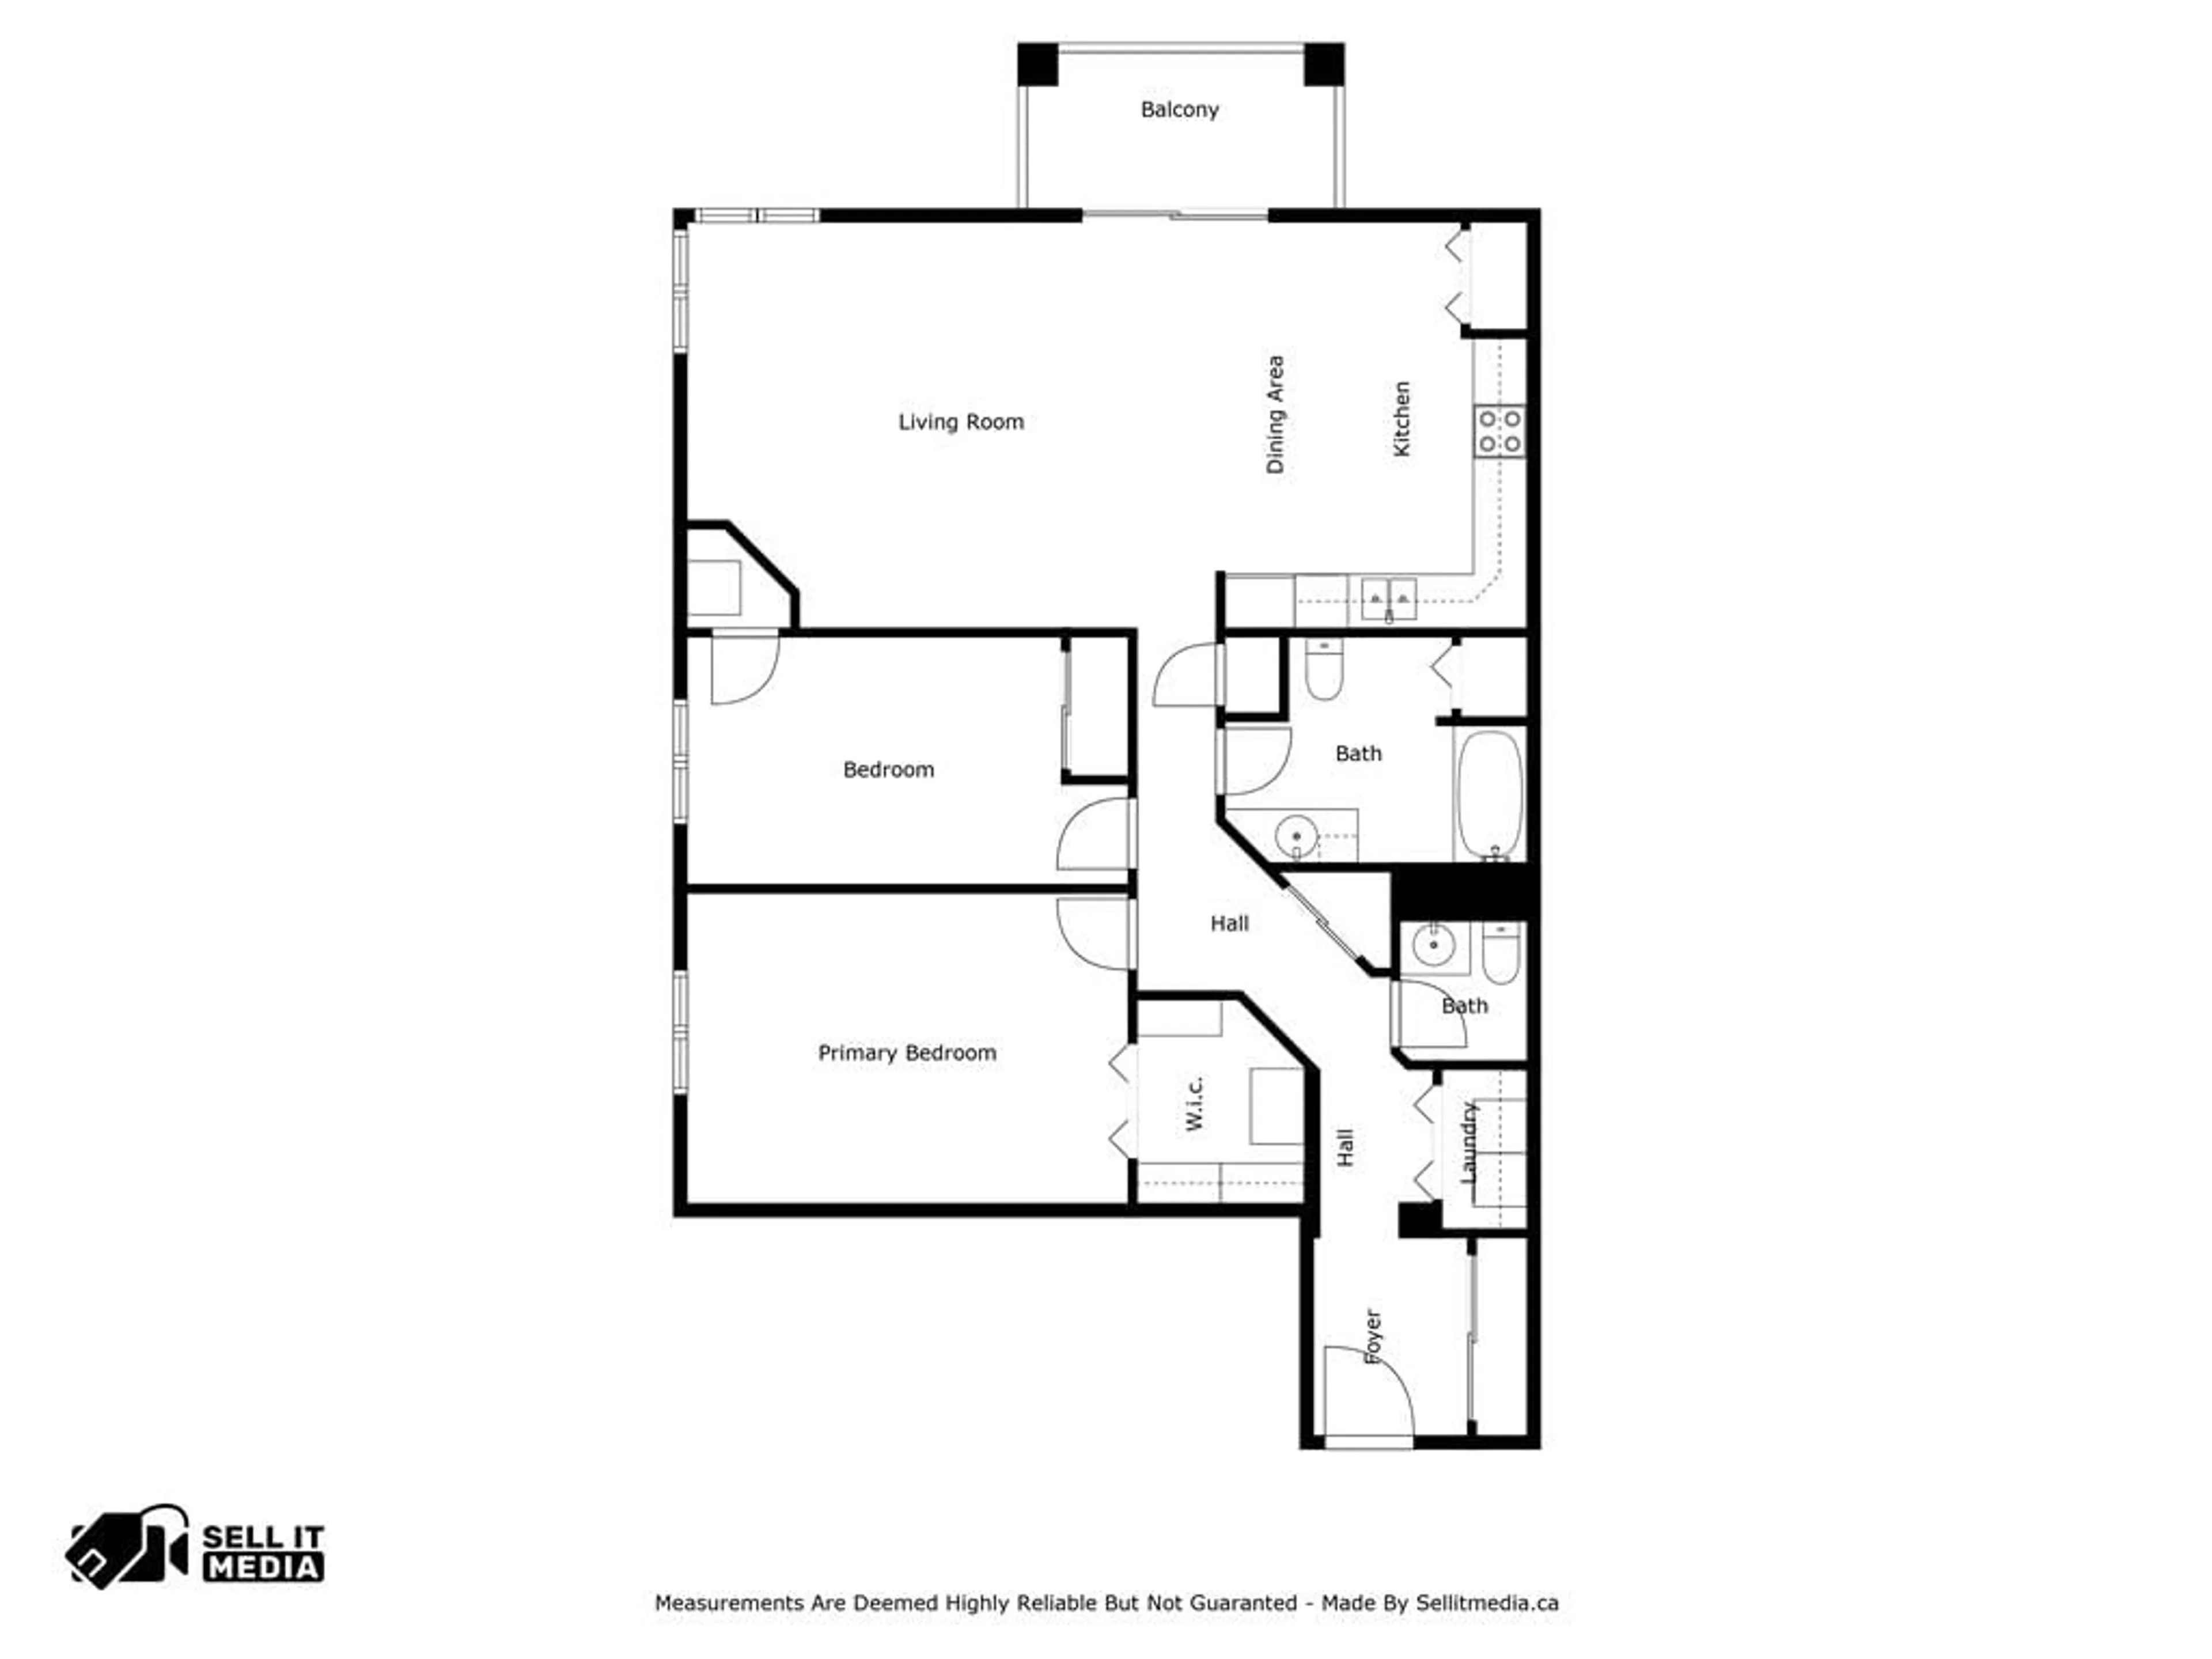 Floor plan for 1303 CLEMENT St #311, Hawkesbury Ontario K6A 3P1